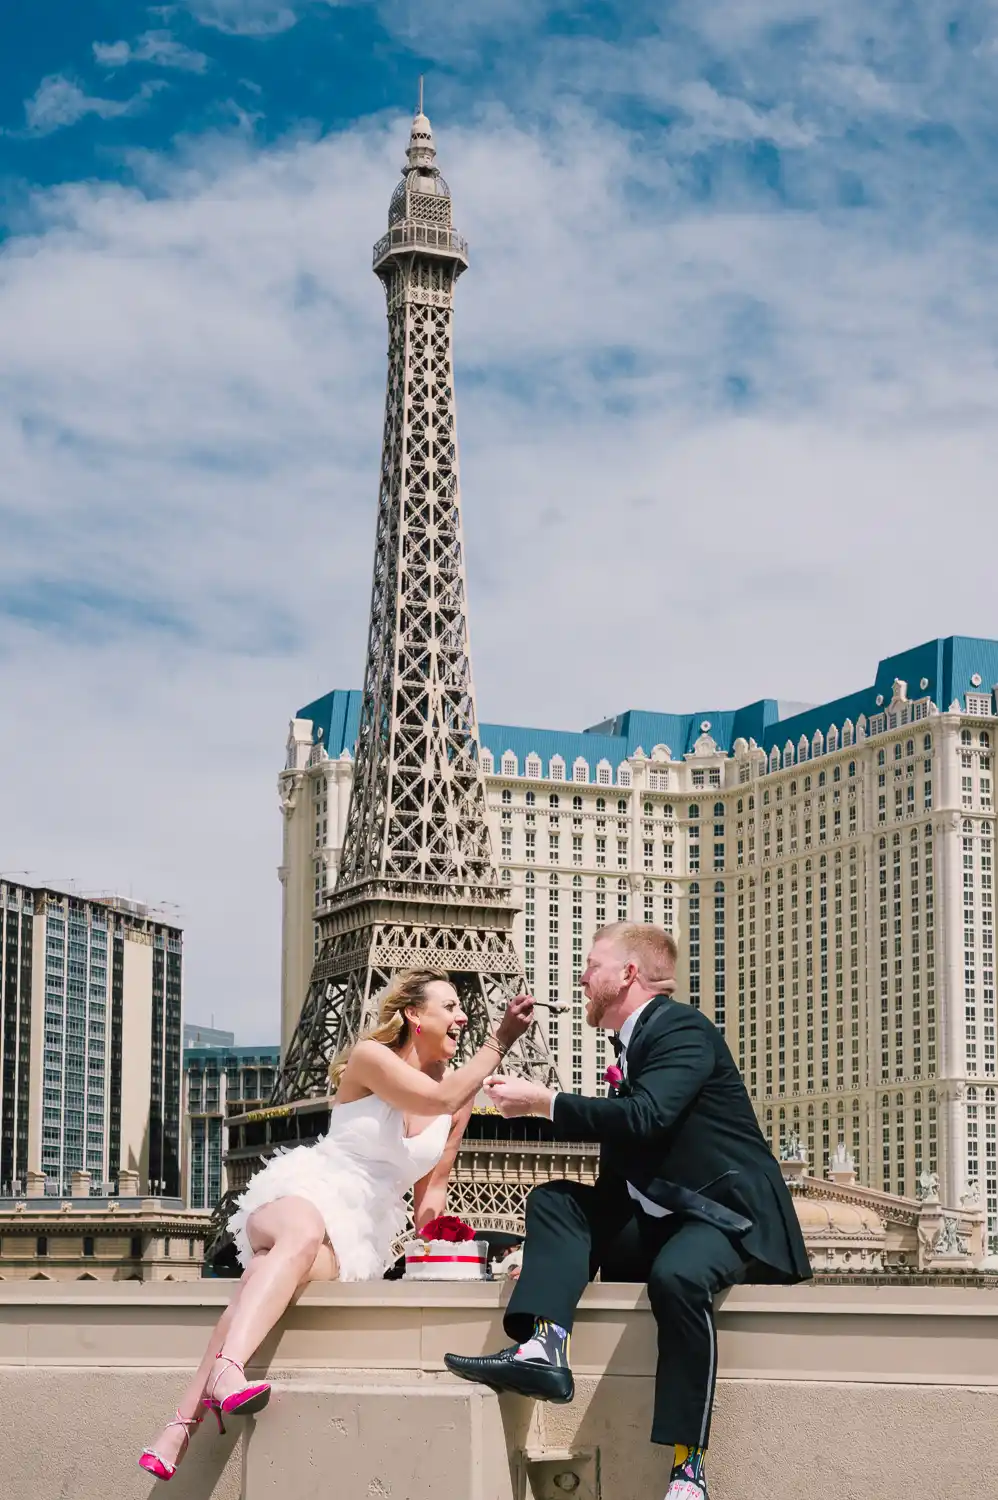 Bellagio hotel cake cutting with Eiffel tower view and Paris hotel